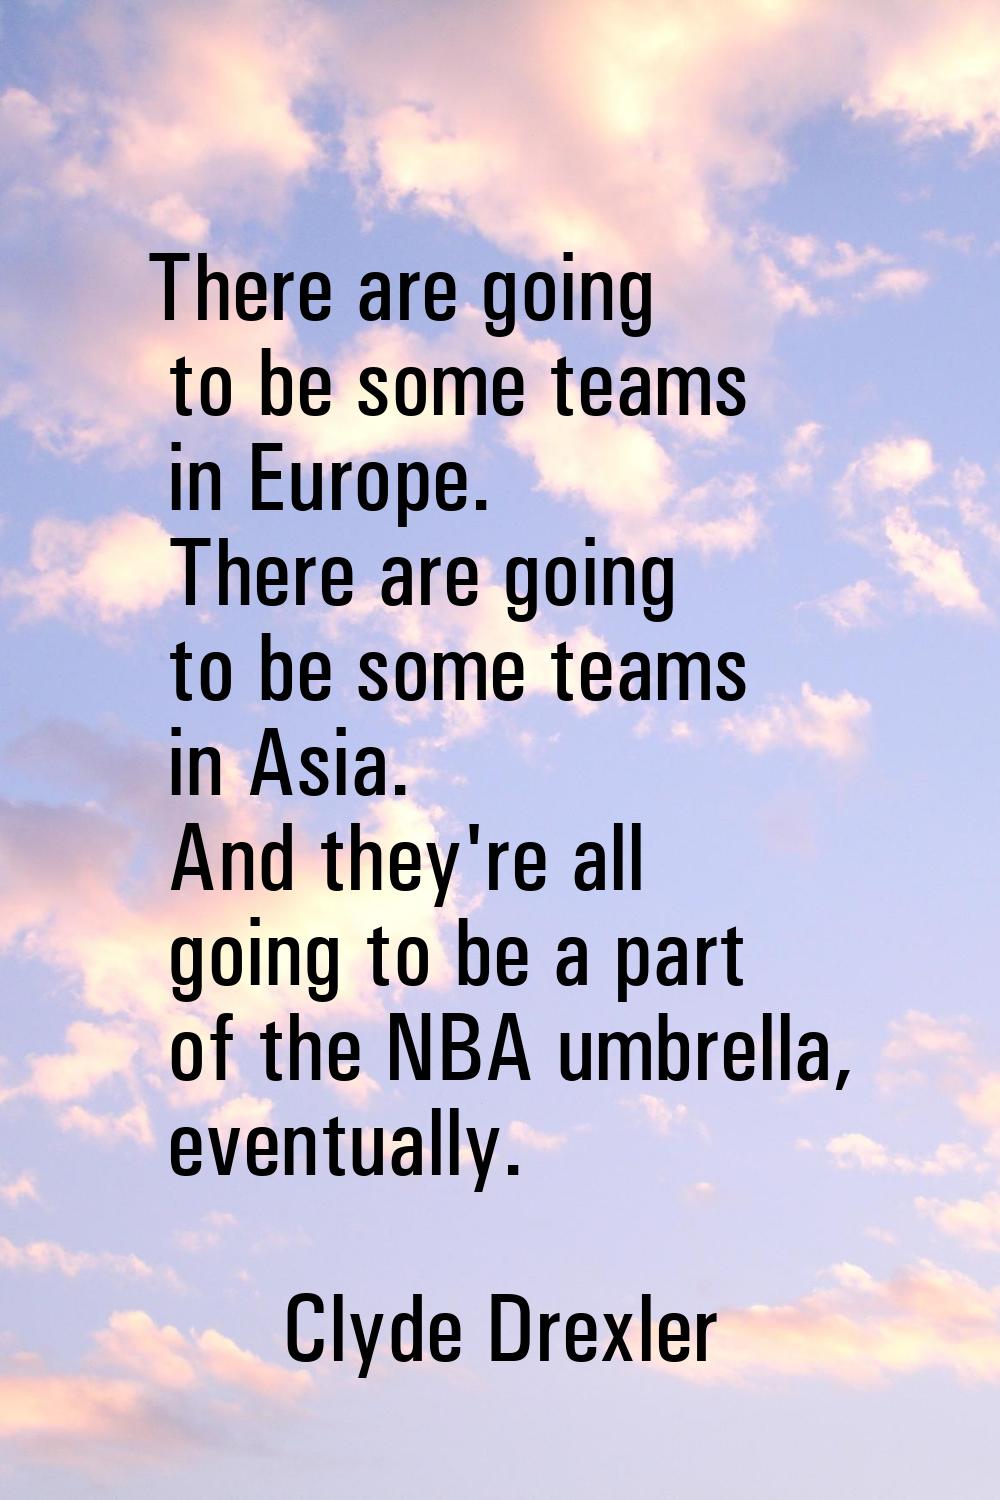 There are going to be some teams in Europe. There are going to be some teams in Asia. And they're a